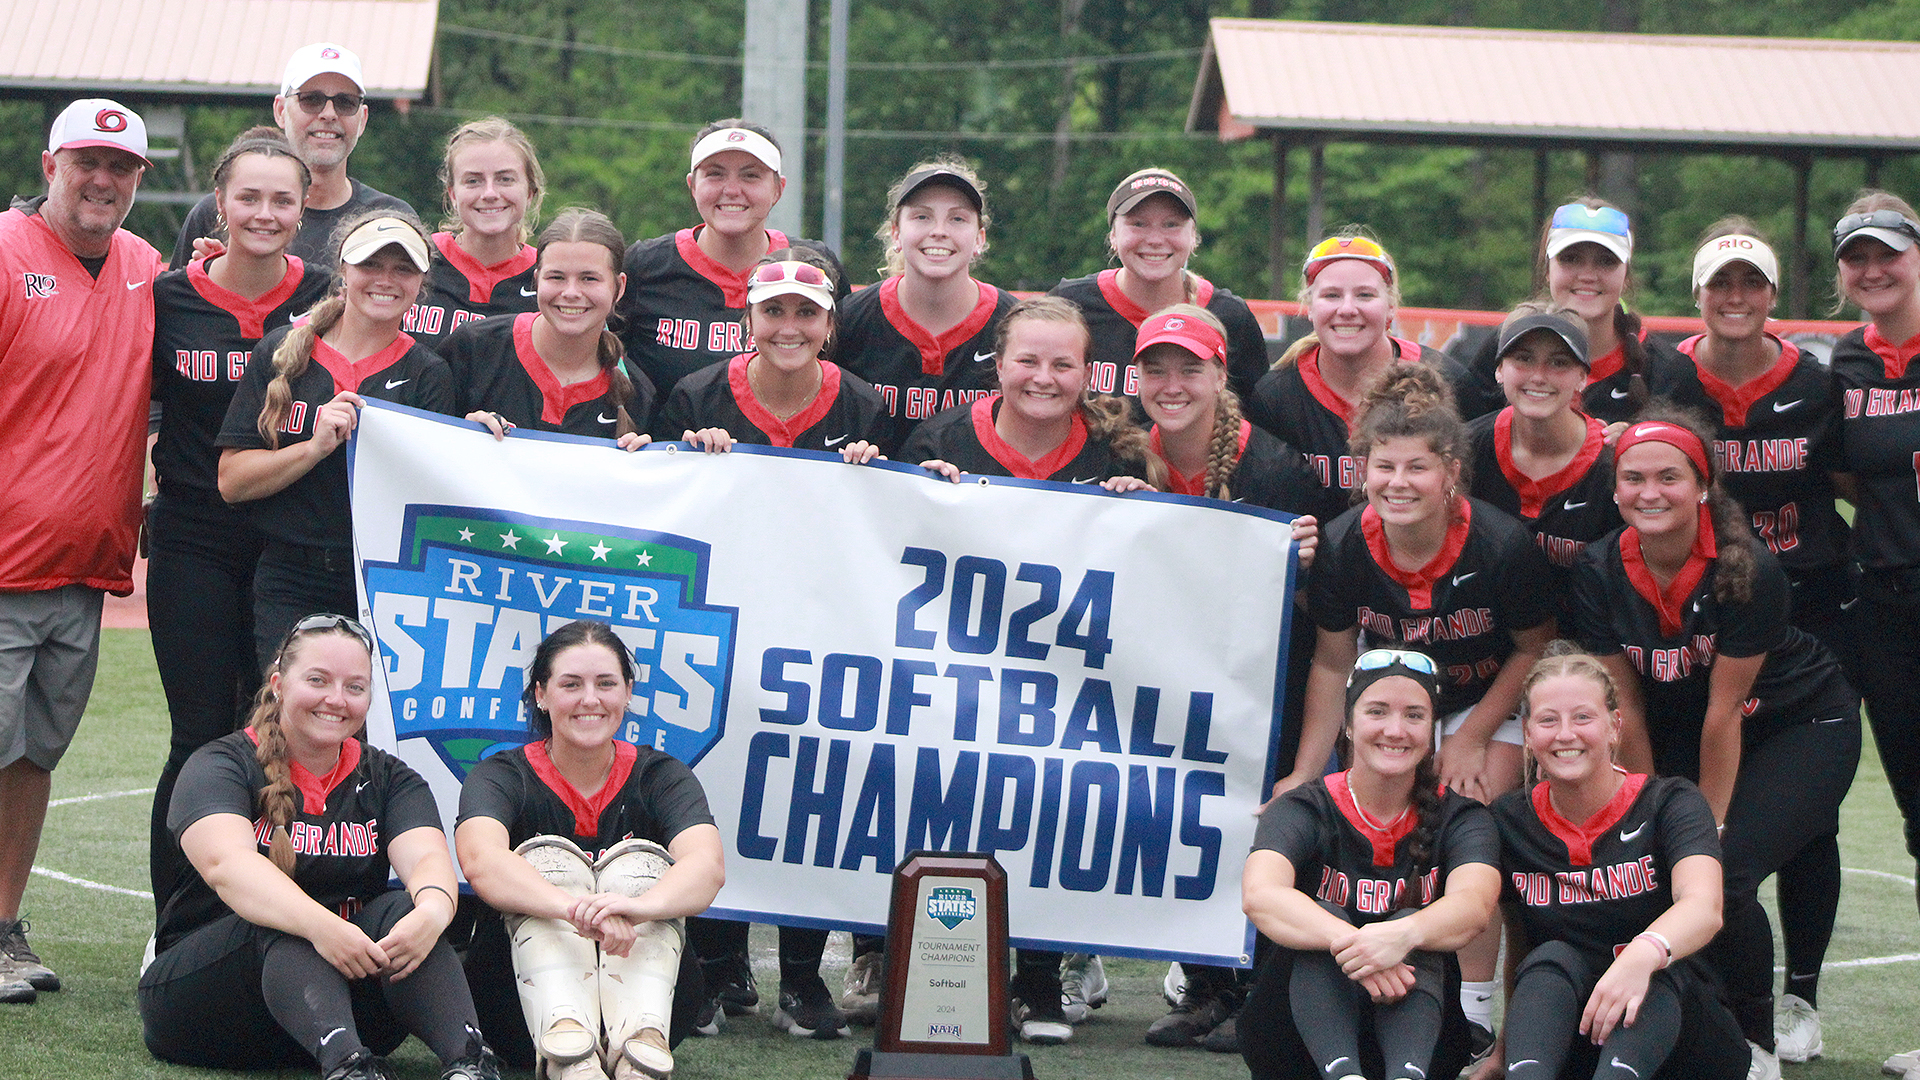 The University of Rio Grande won the RSC Softball Championship with a pair of wins over rival Shawnee State University on Saturday at Little Creek Park in South Charleston, W.Va.